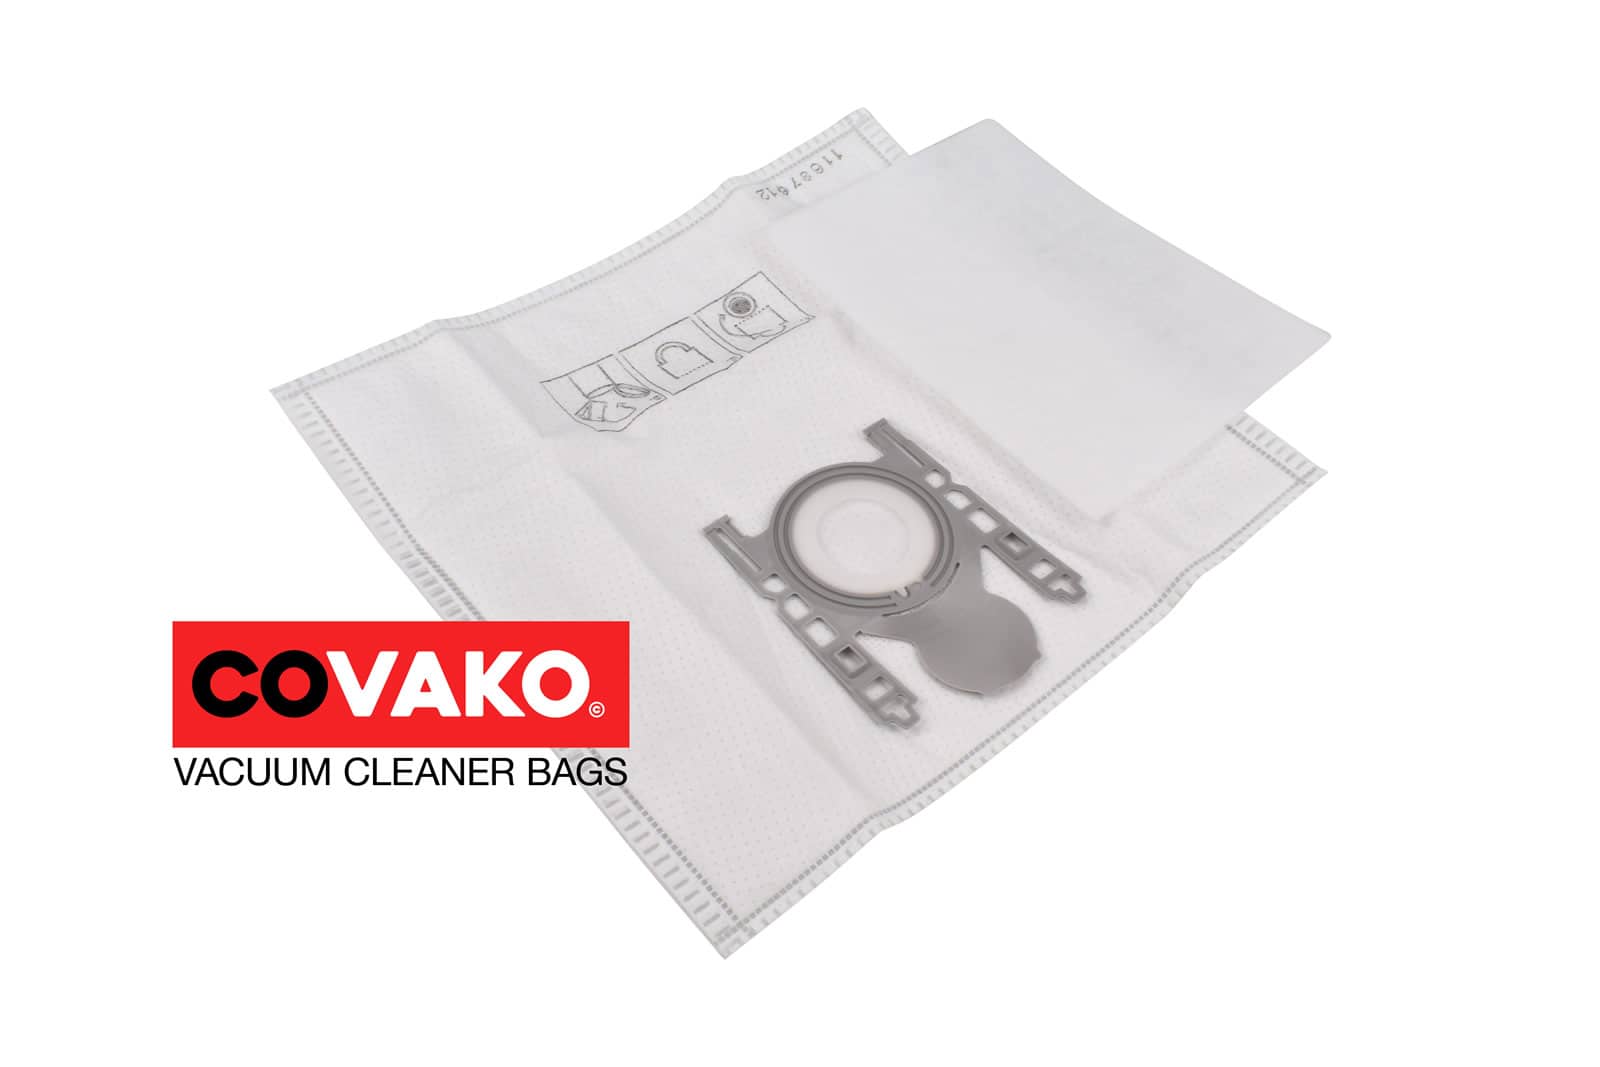 Bosch Terrossa-Serie / Synthesis - Bosch vacuum cleaner bags